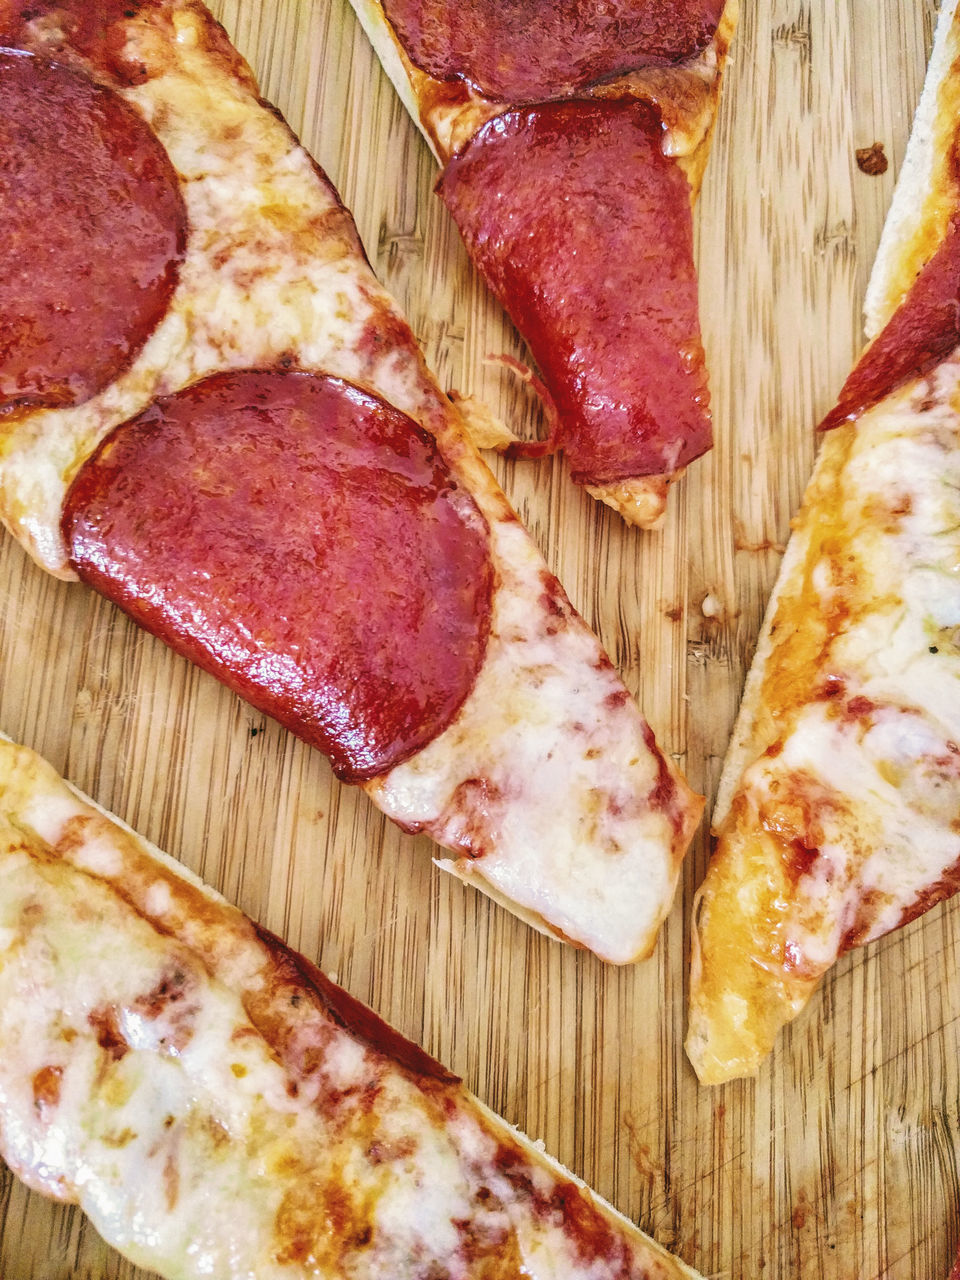 CLOSE-UP OF PIZZA ON CUTTING BOARD